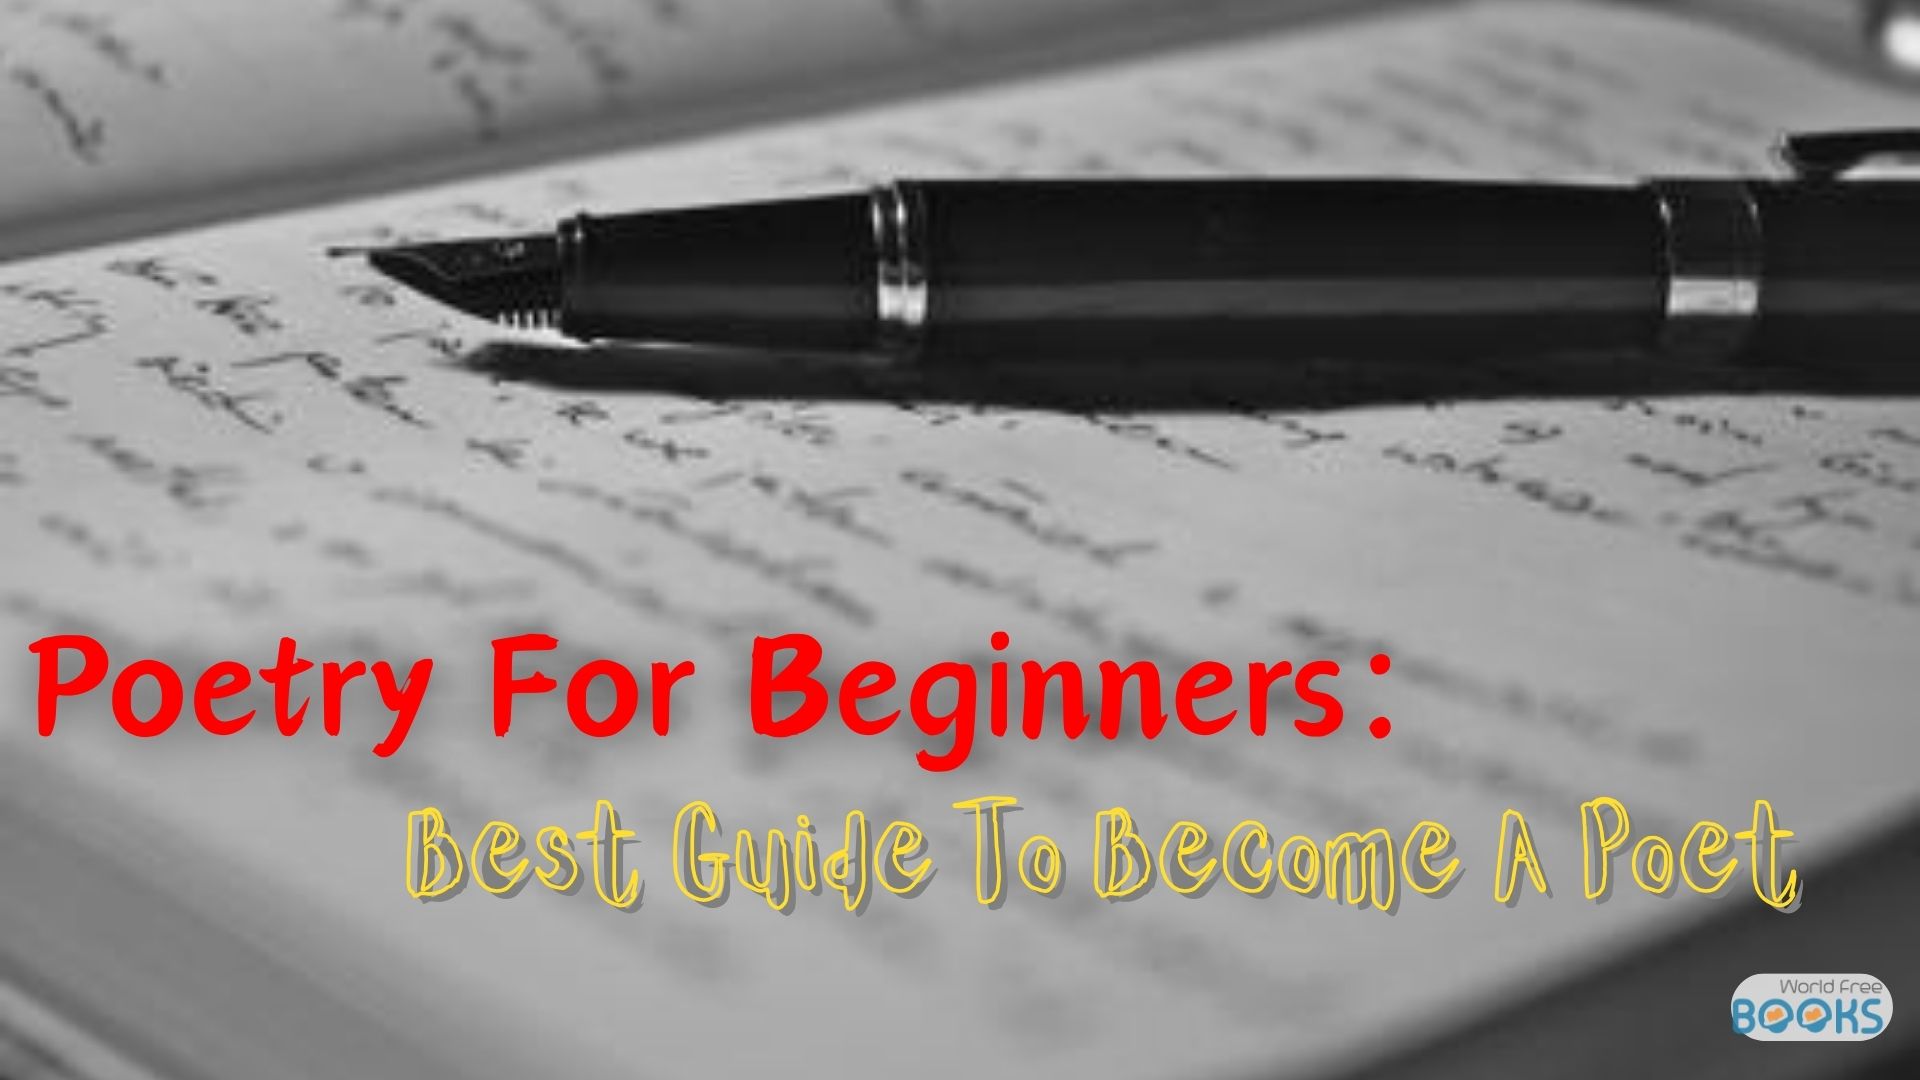 Poetry For Beginners: Best Guide To Become A Poet